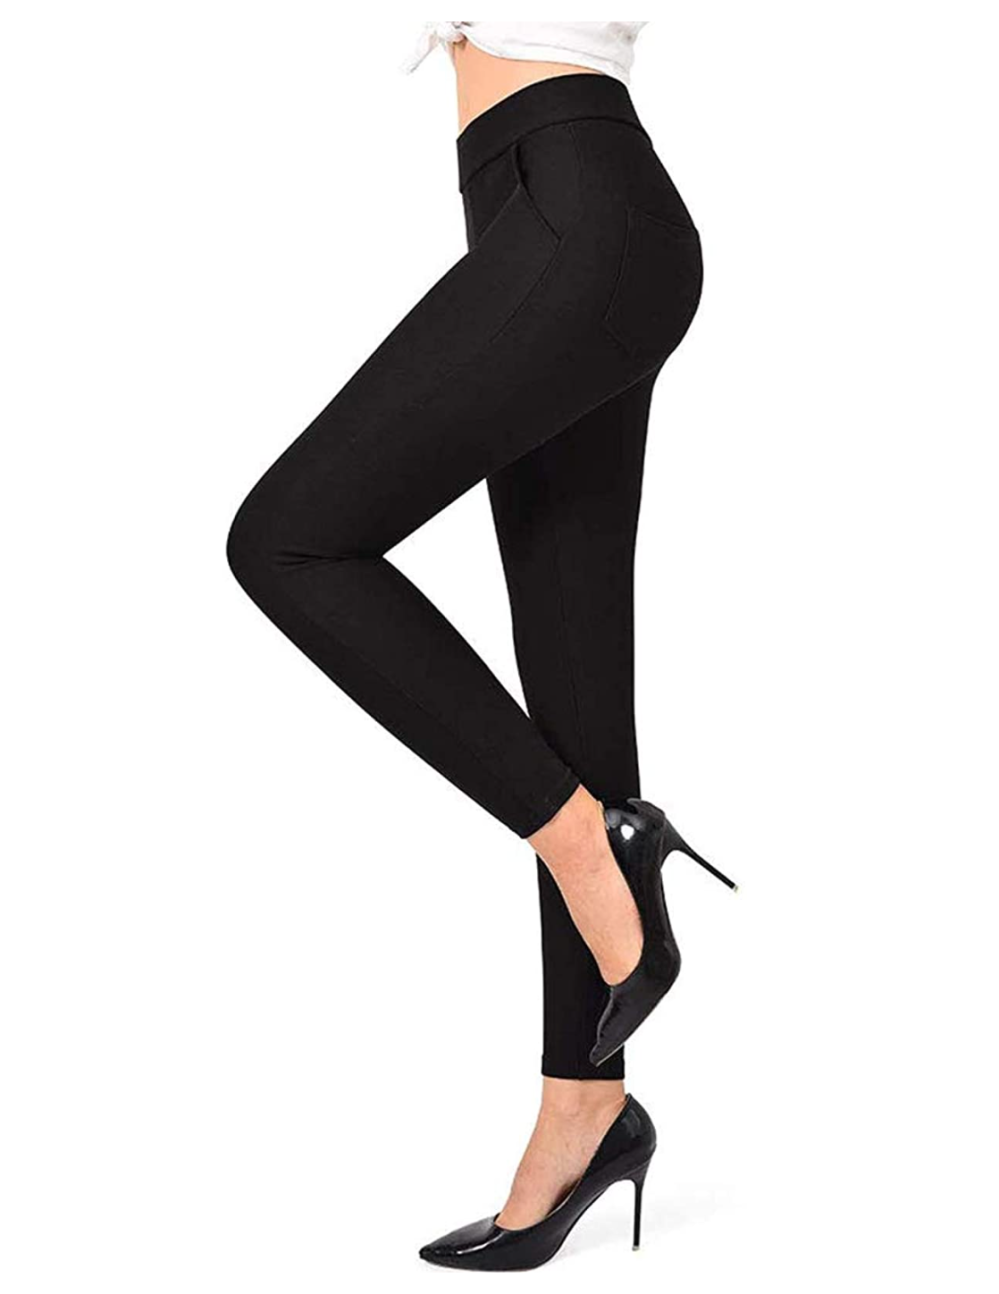 Ginasy Stretch Dress Pants Make Going Back to the Office Easier